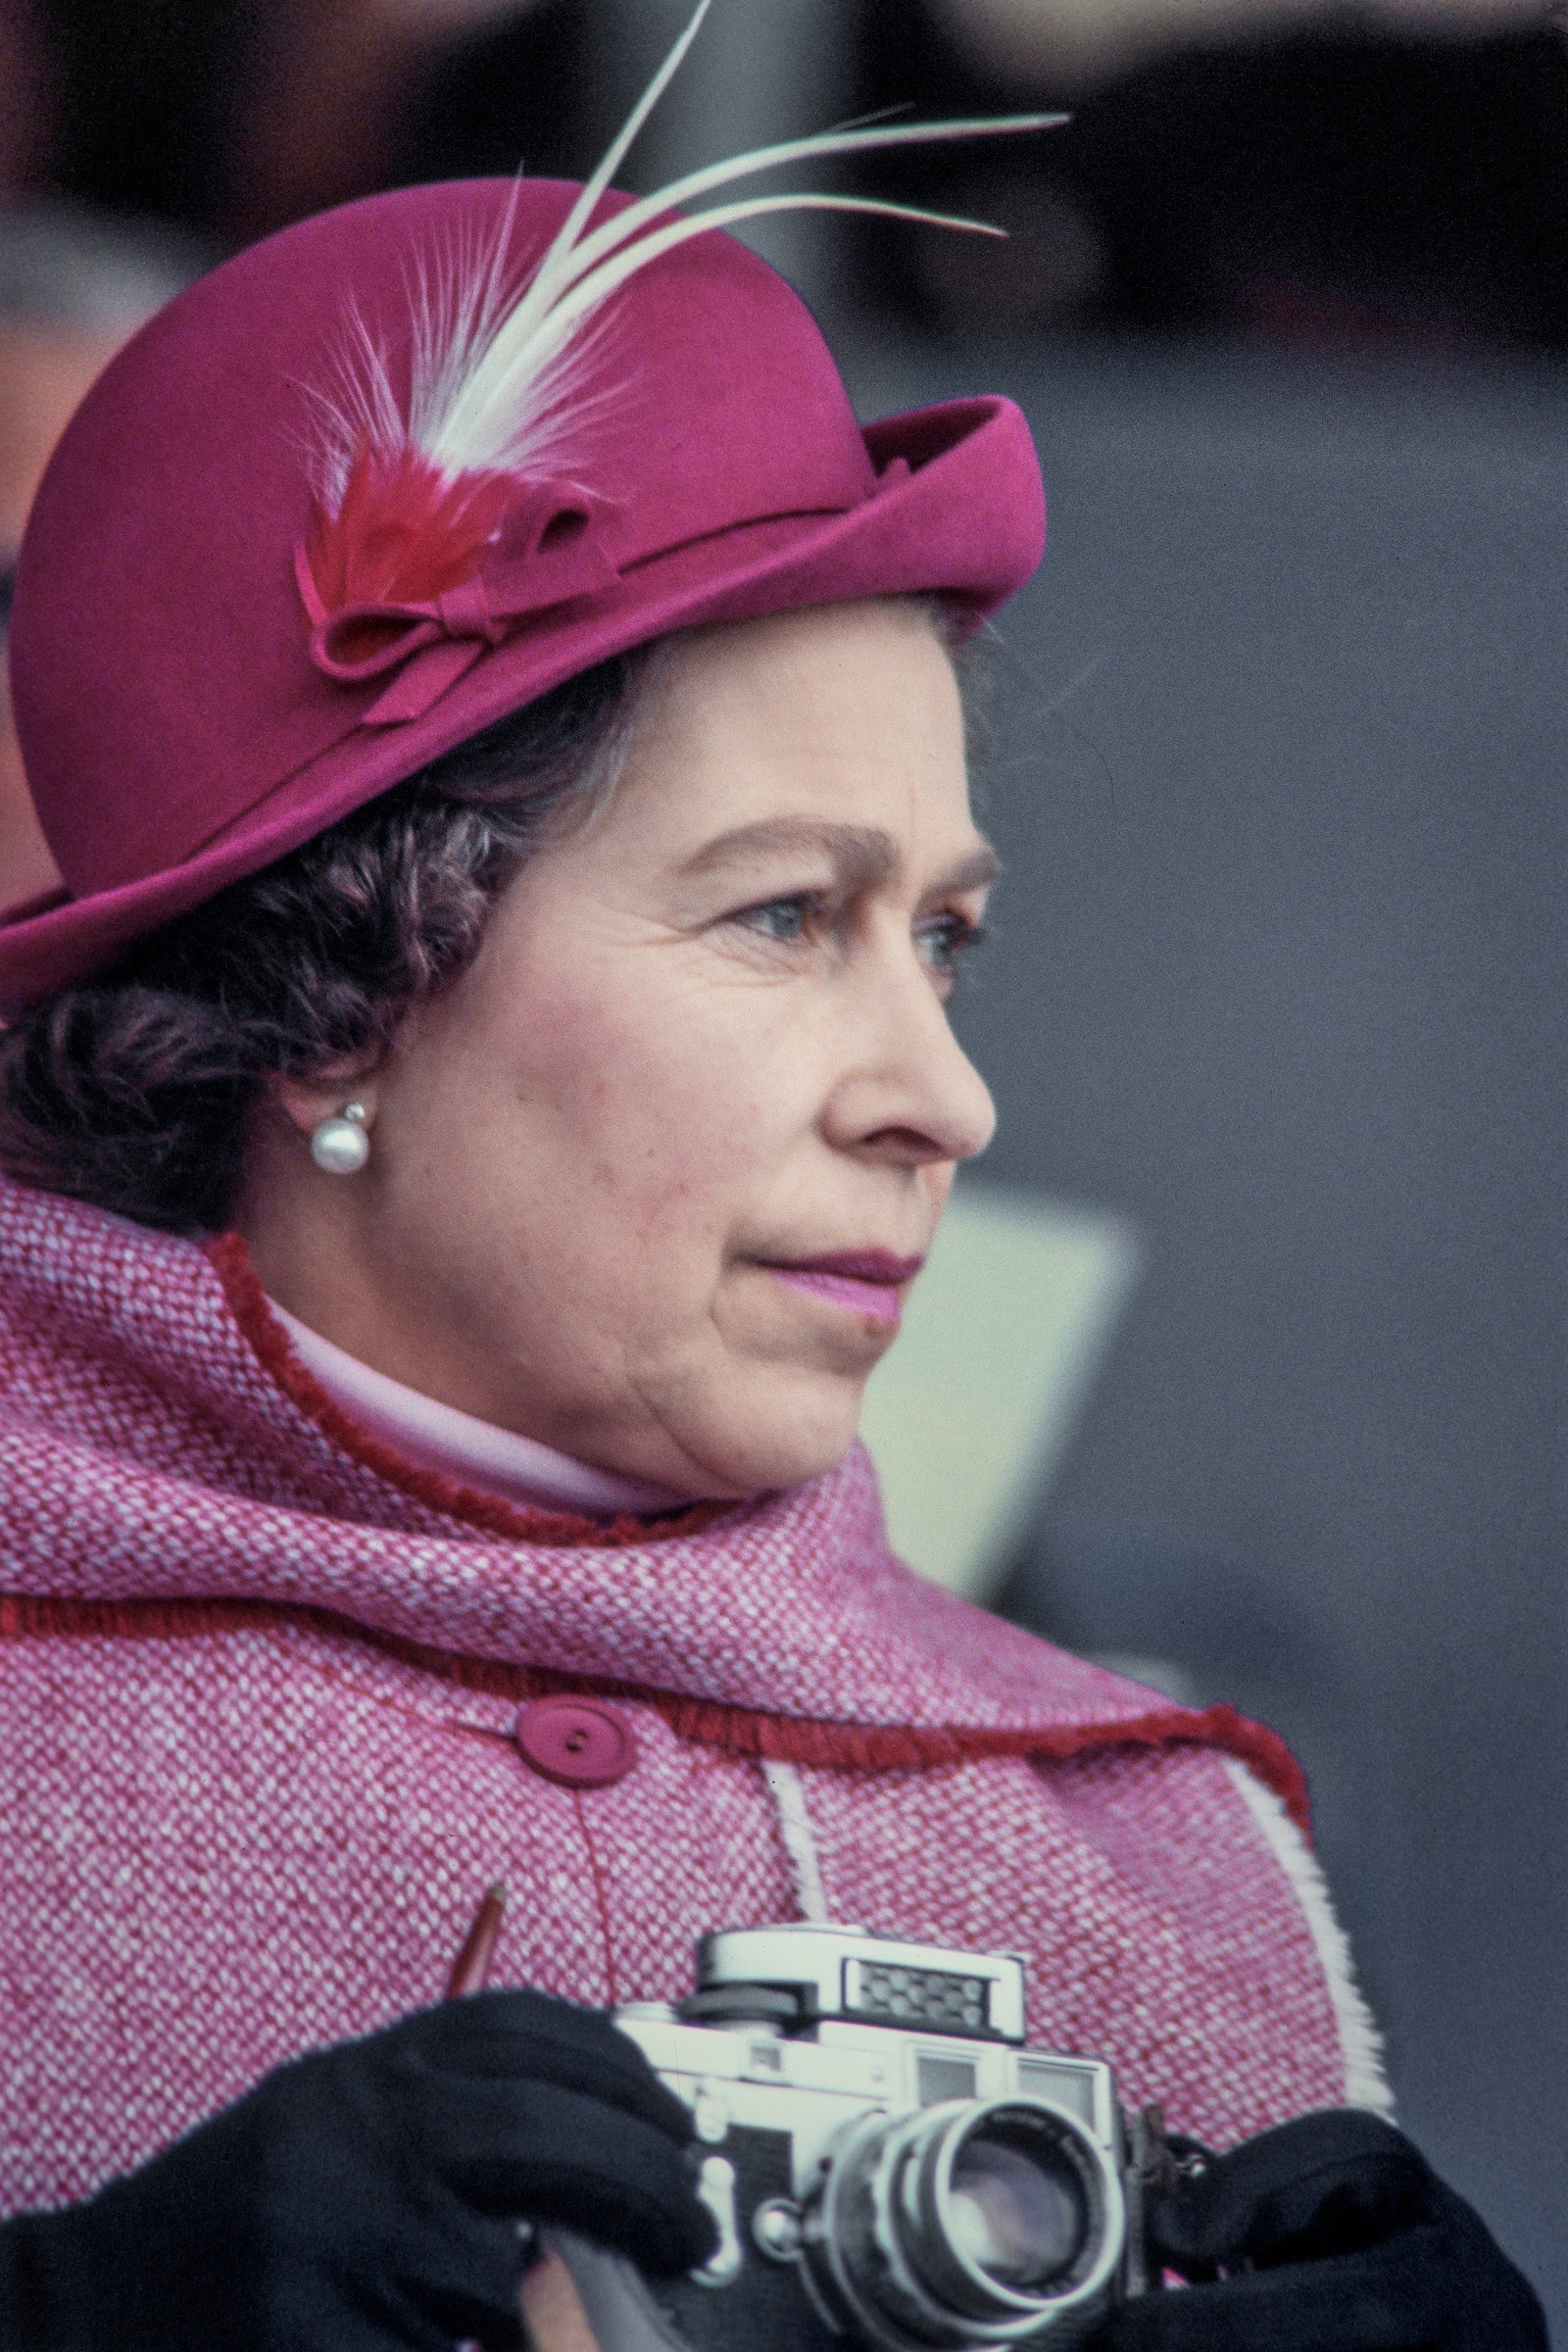 Close-up of British monarch Queen Elizabeth II, in a pale red, feathered, felt hat and a wool cape, as she holds a Leica M3 camera while attending an equestrian event, Windsor, England, circa 1975.